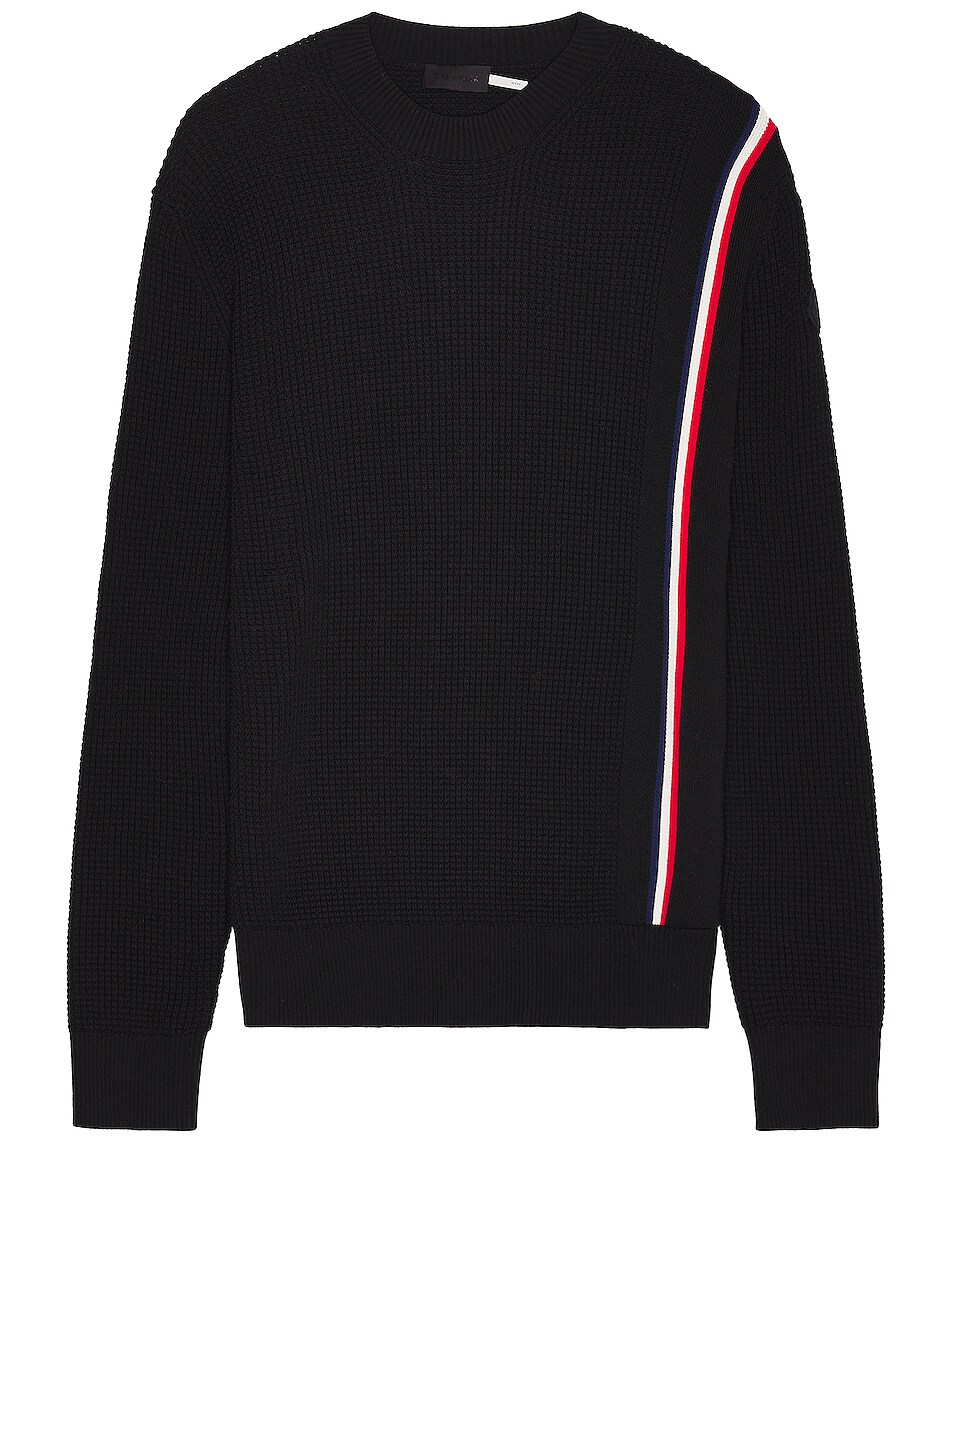 Image 1 of Moncler Crew Neck in Black